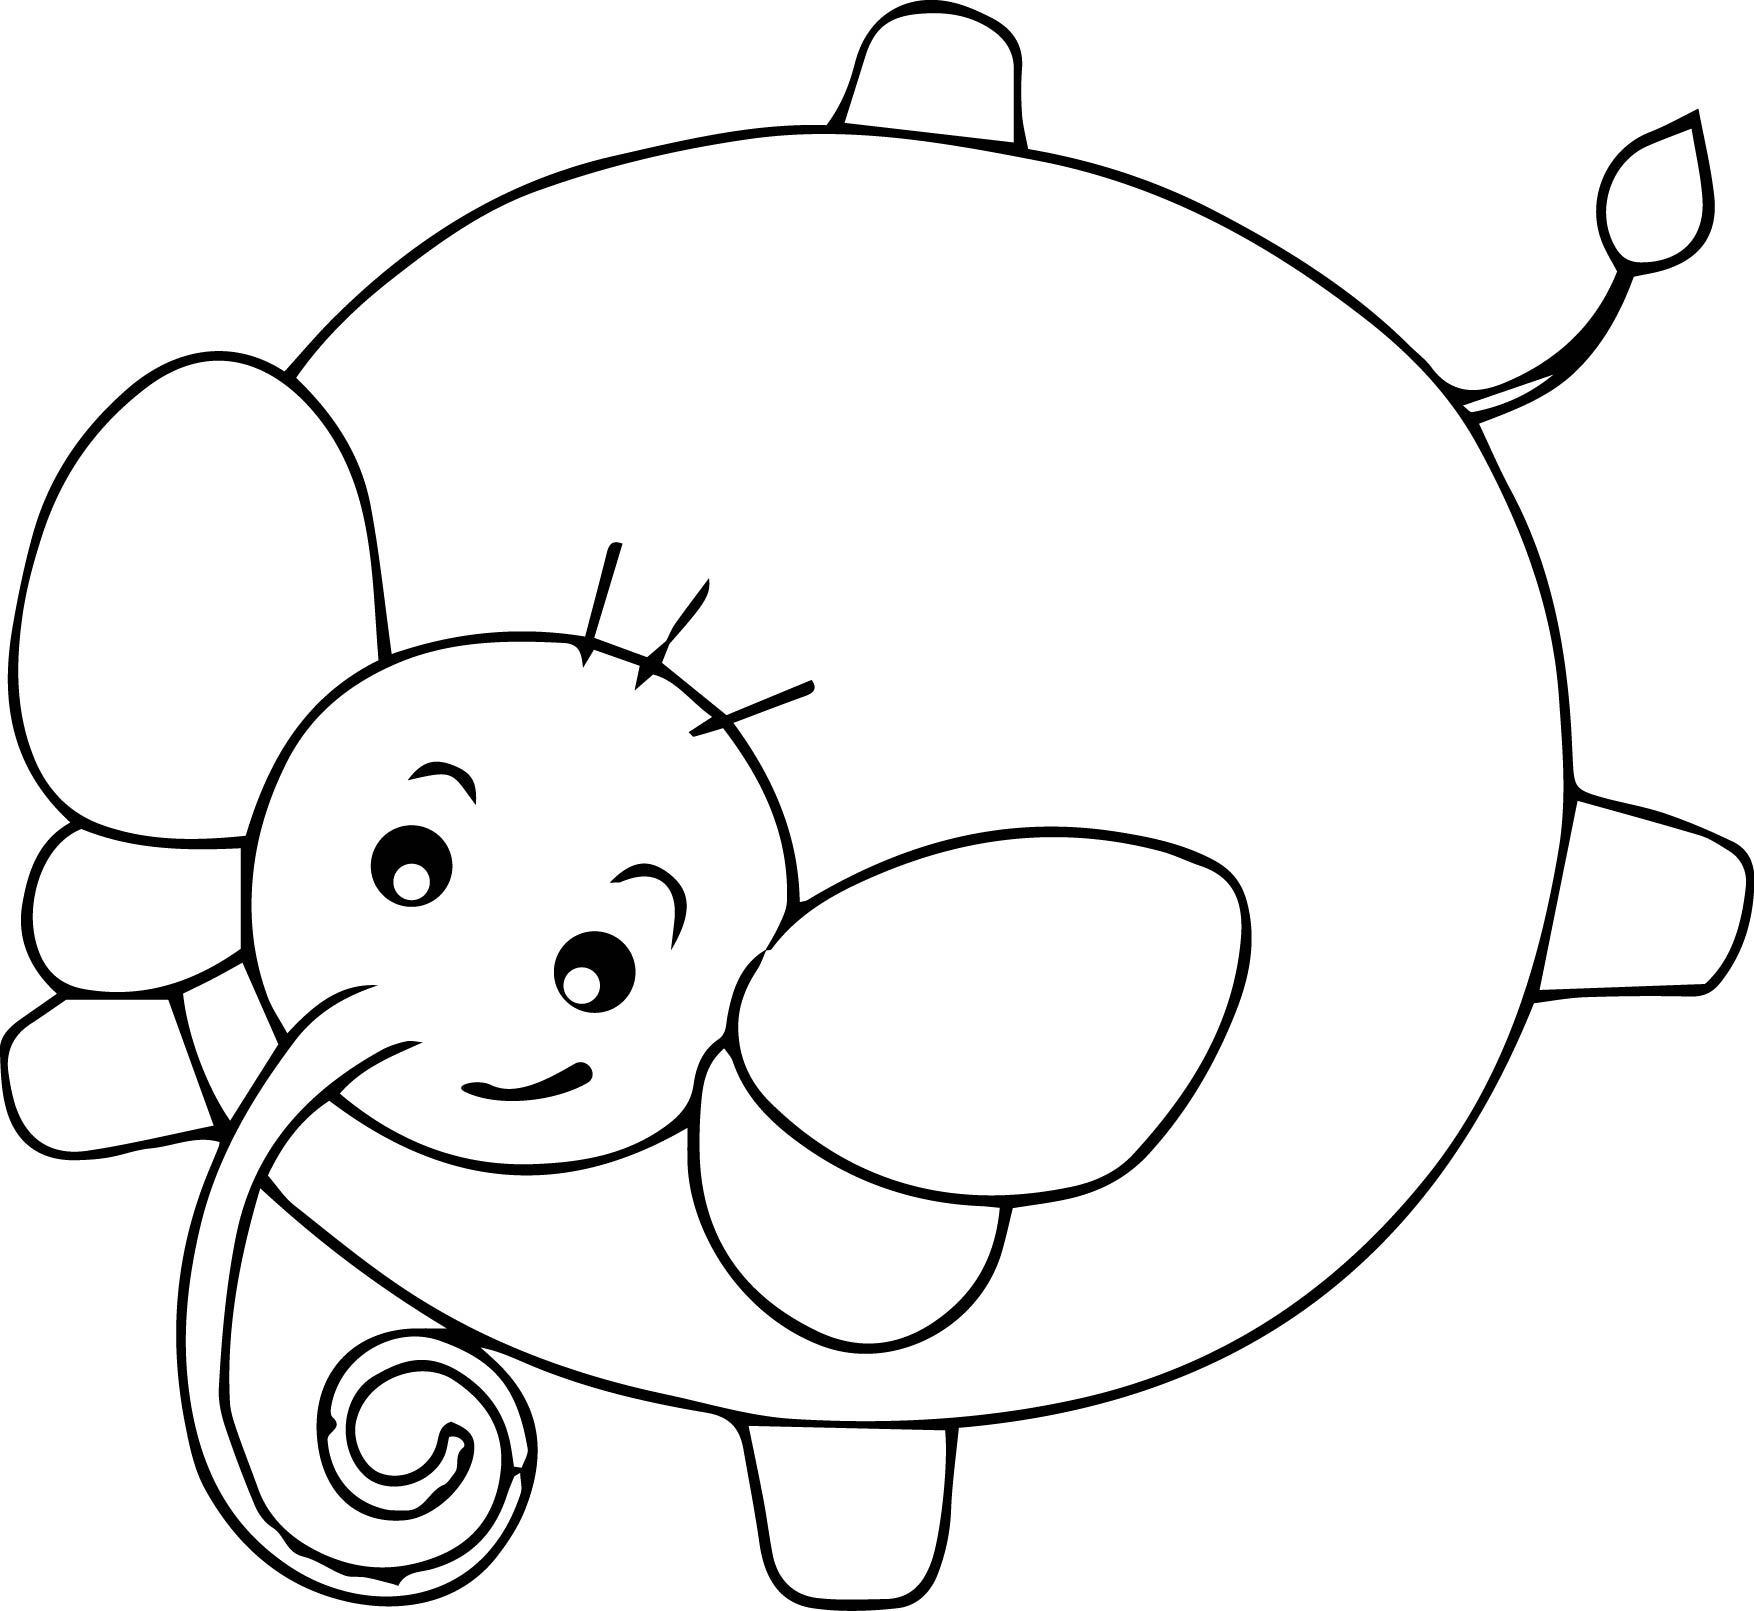 Elephant Coloring Page 46